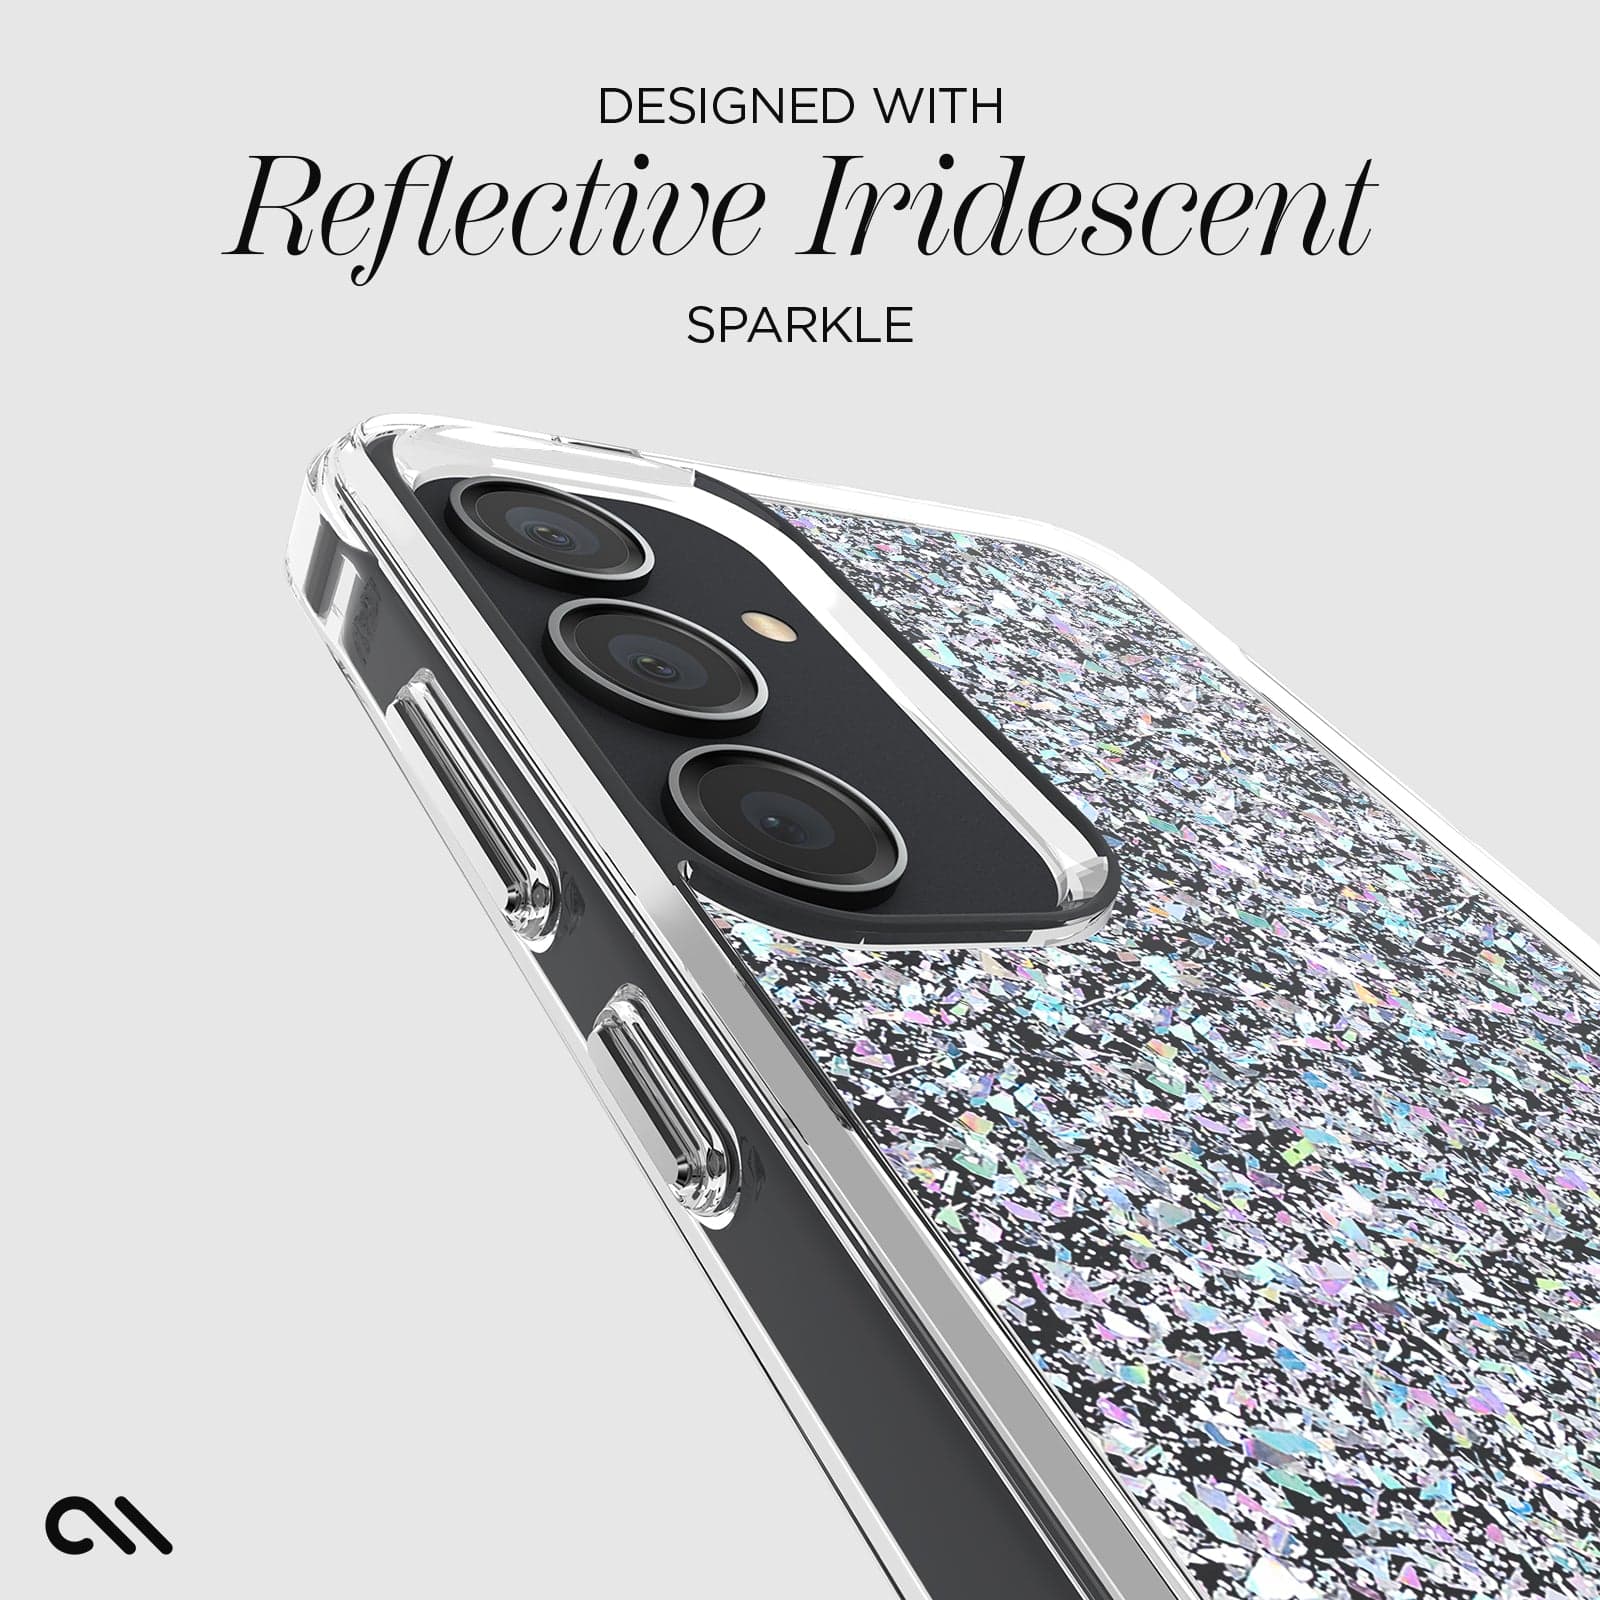 DESIGNED WITH REFLECTIVE IRIDESCENT SPARKLE